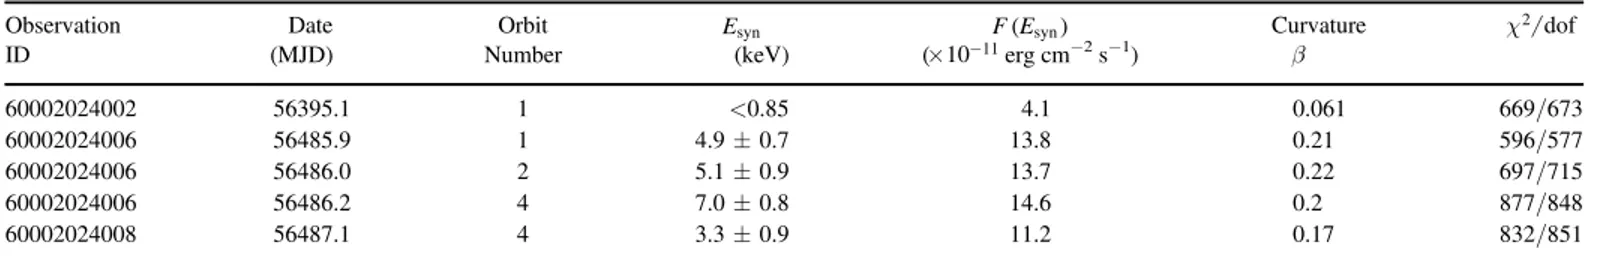 Figure 9. Fractional variability (F var ) calculated for each instrument separately.